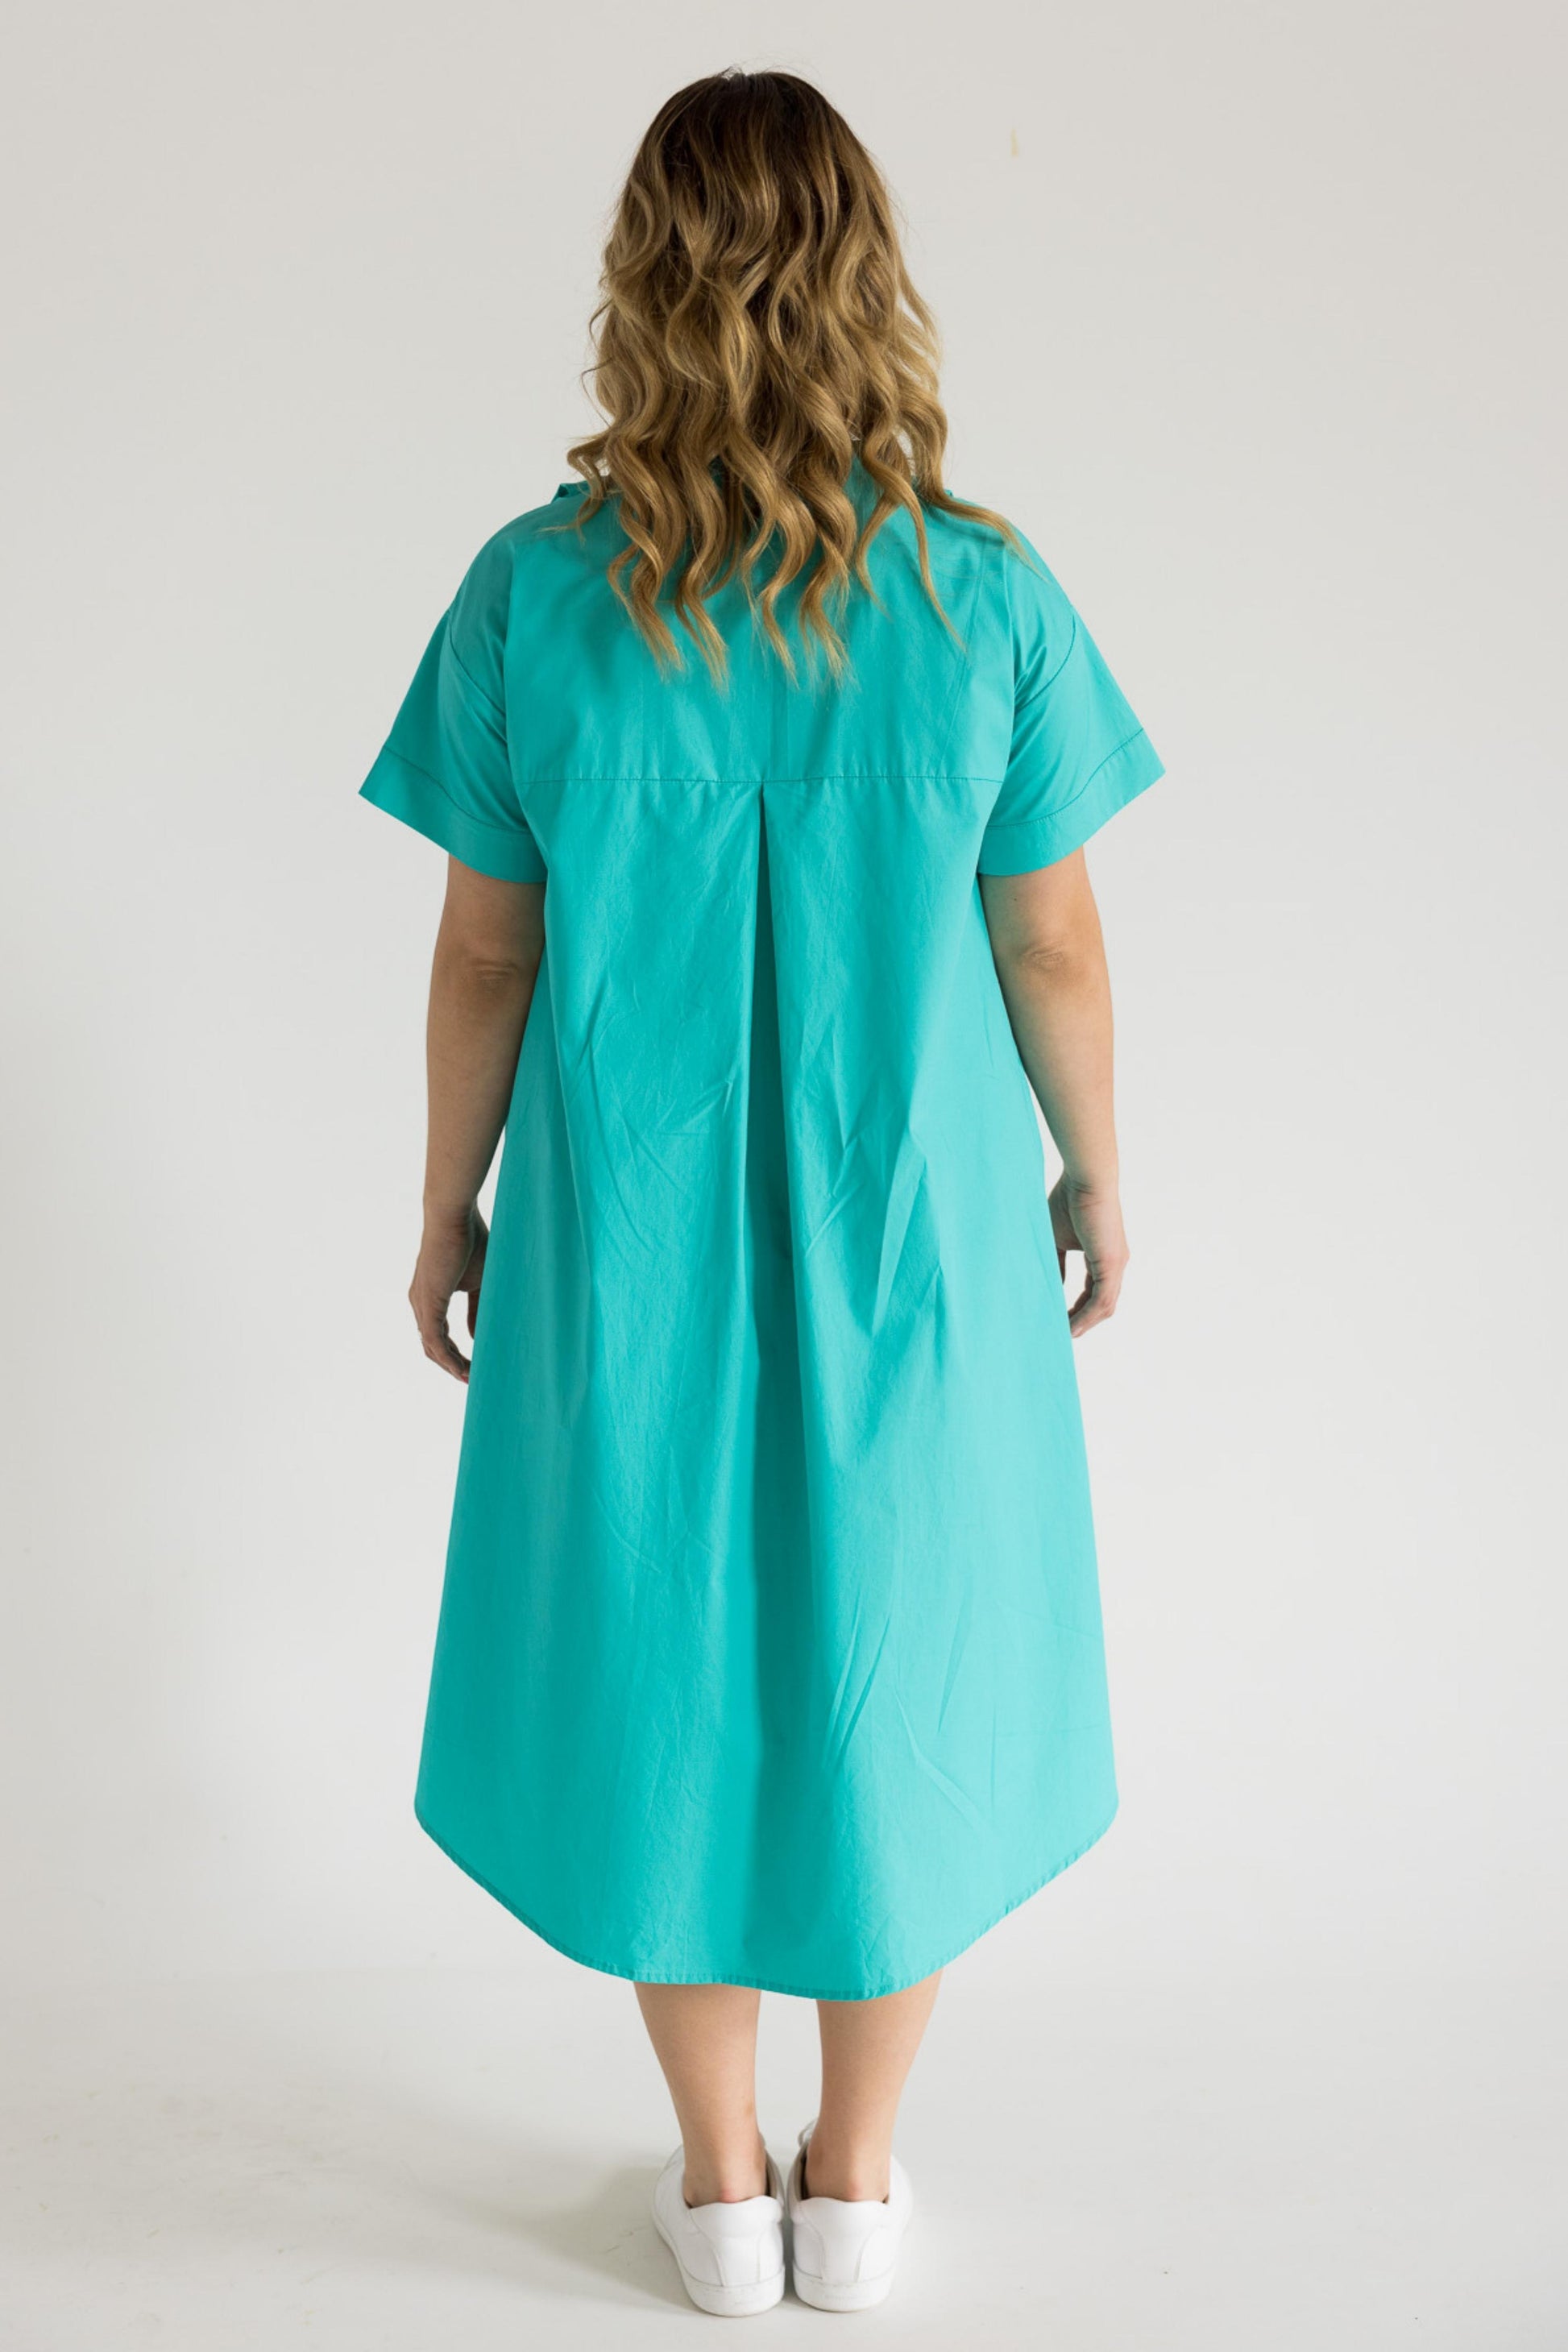 Hastings Dress in Turquoise